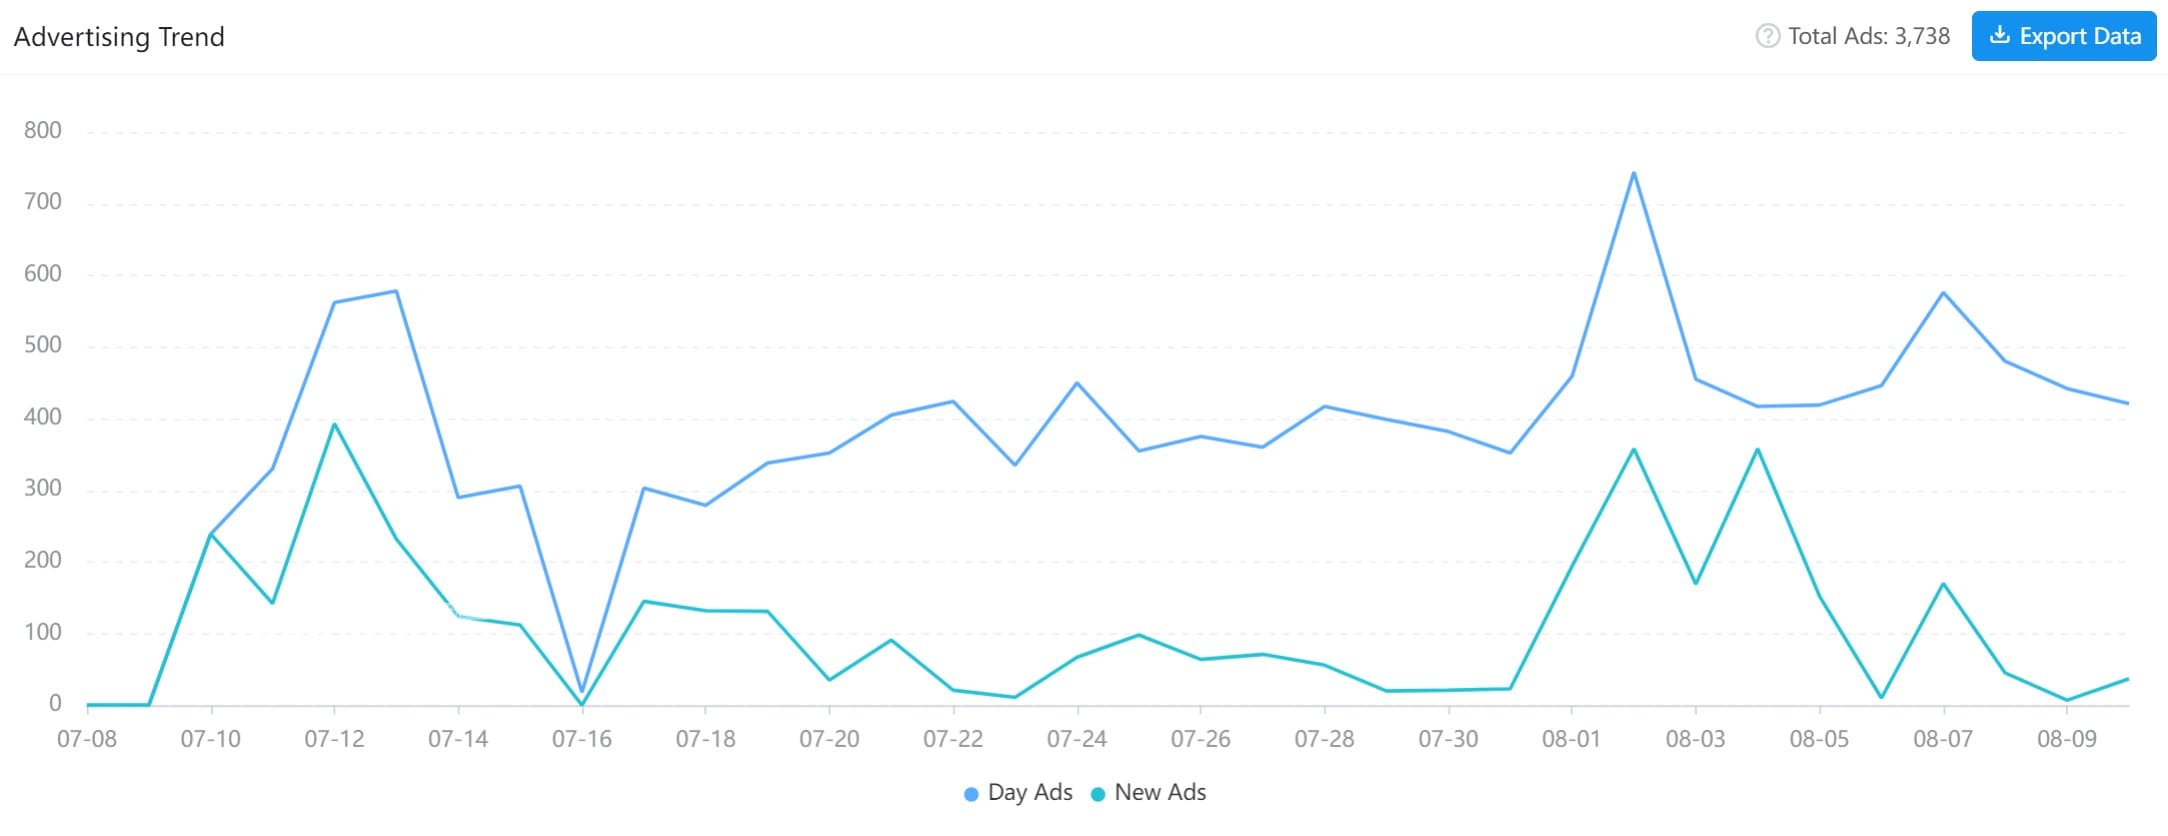 According to AppGrowing, Kỷ Nguyên GenZ started a massive ad campaign 3 days before its launch. The ad volume for a single day was usually over 300, reaching a peak of 744 on August 2nd.